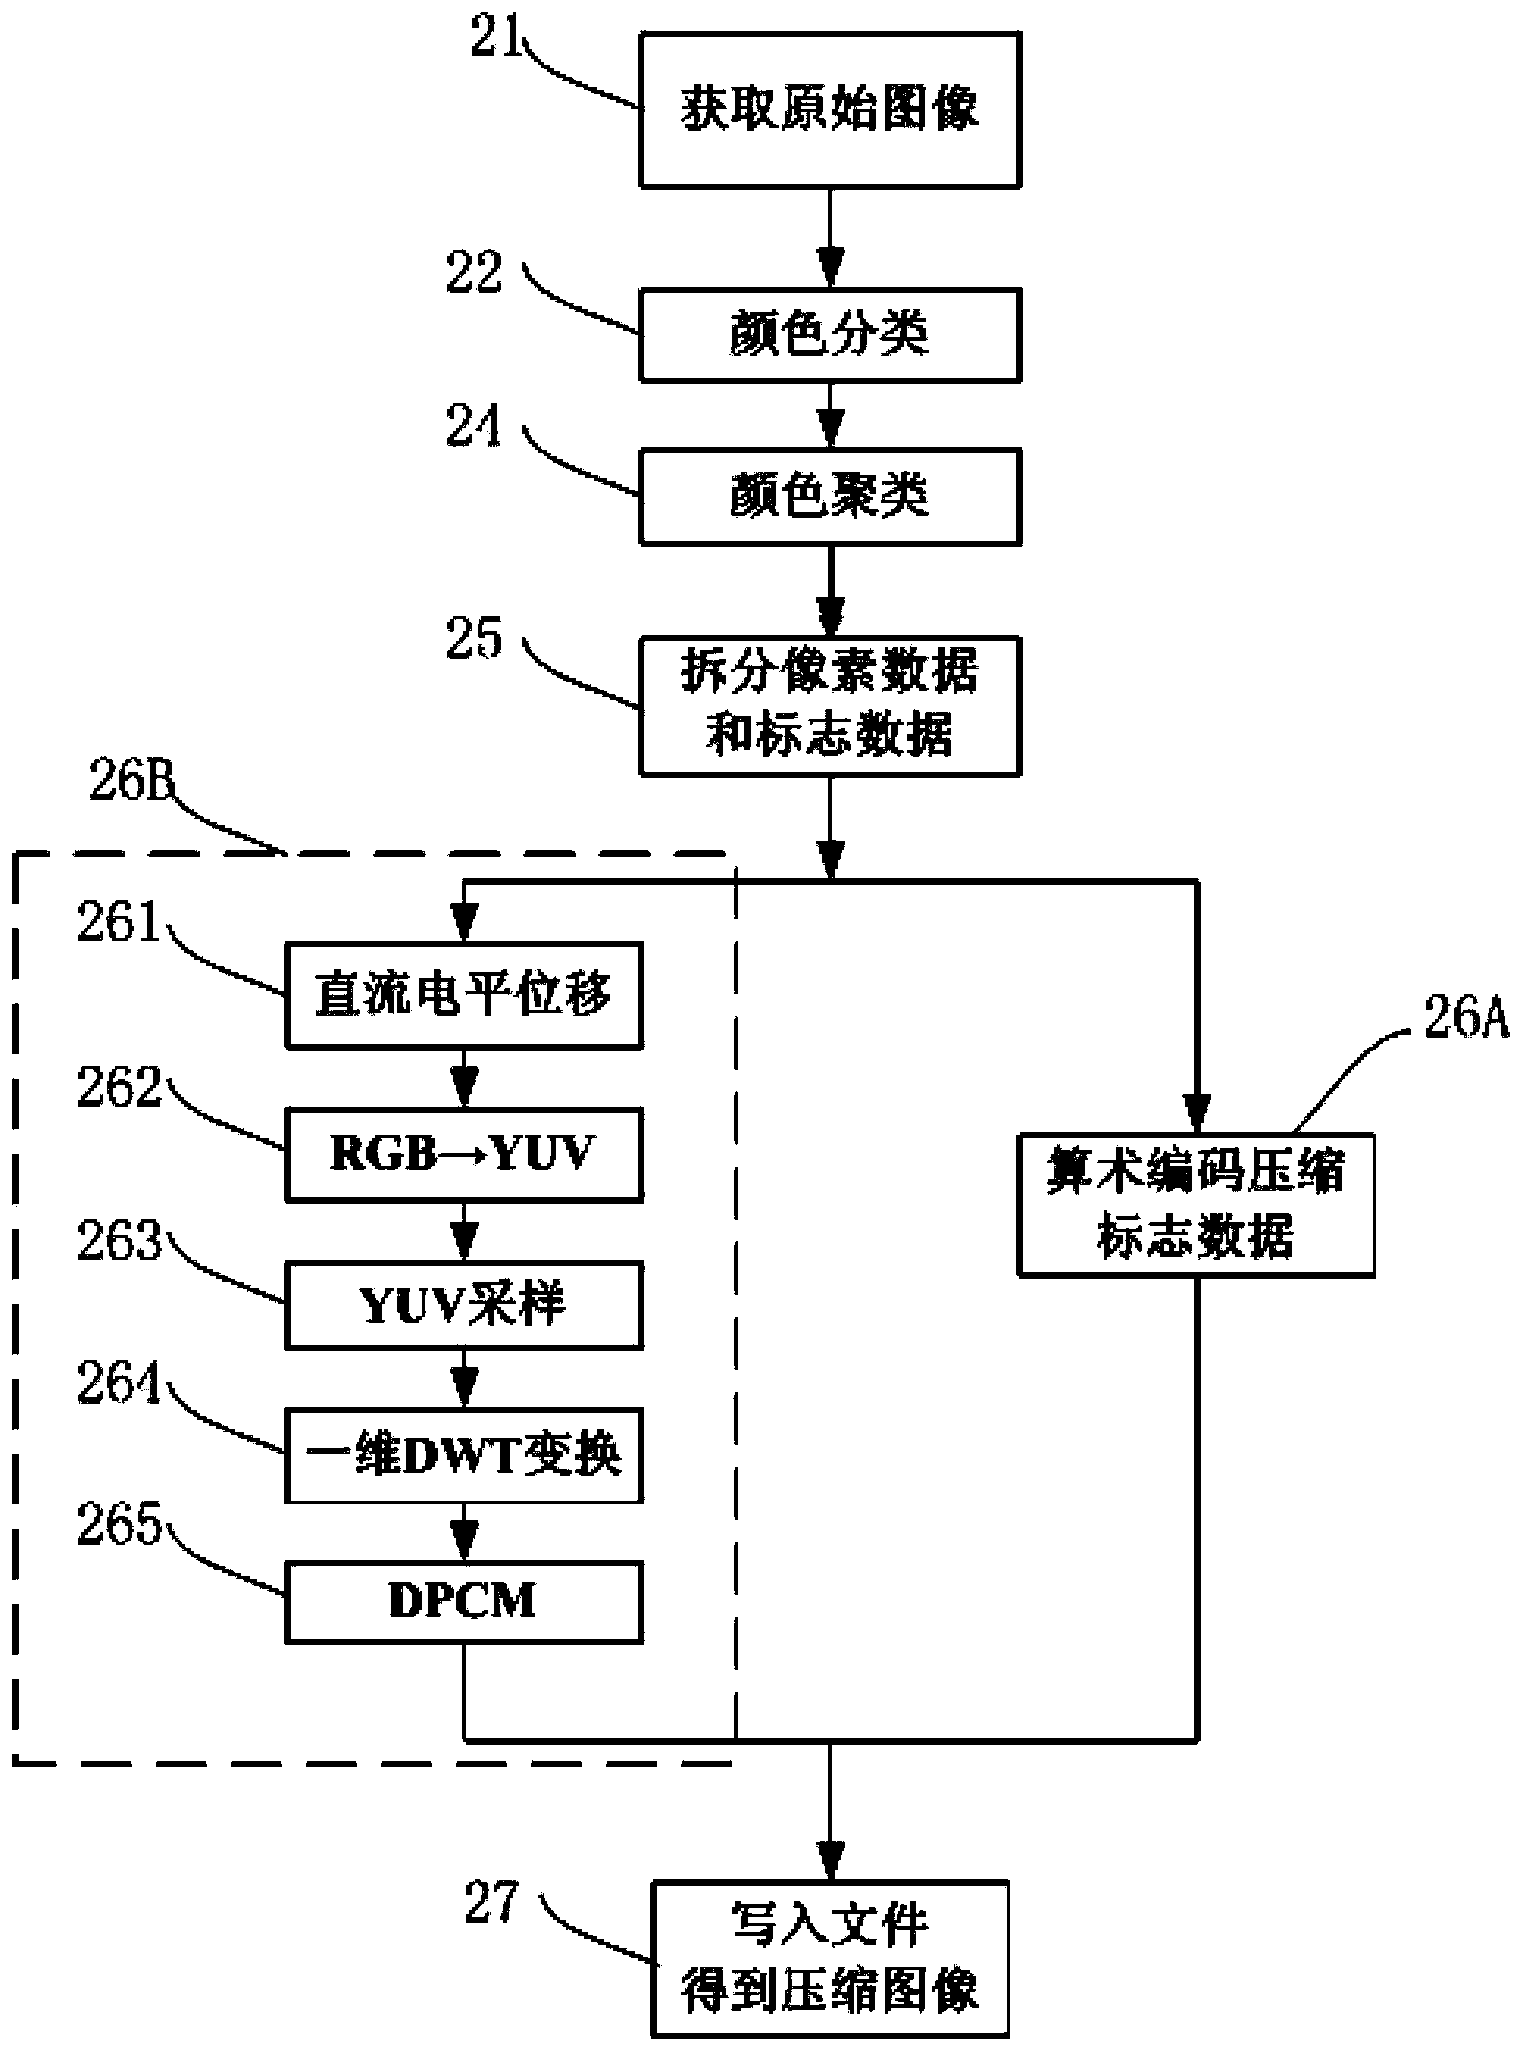 Method for compressing and uncompressing image based on color classification and cluster